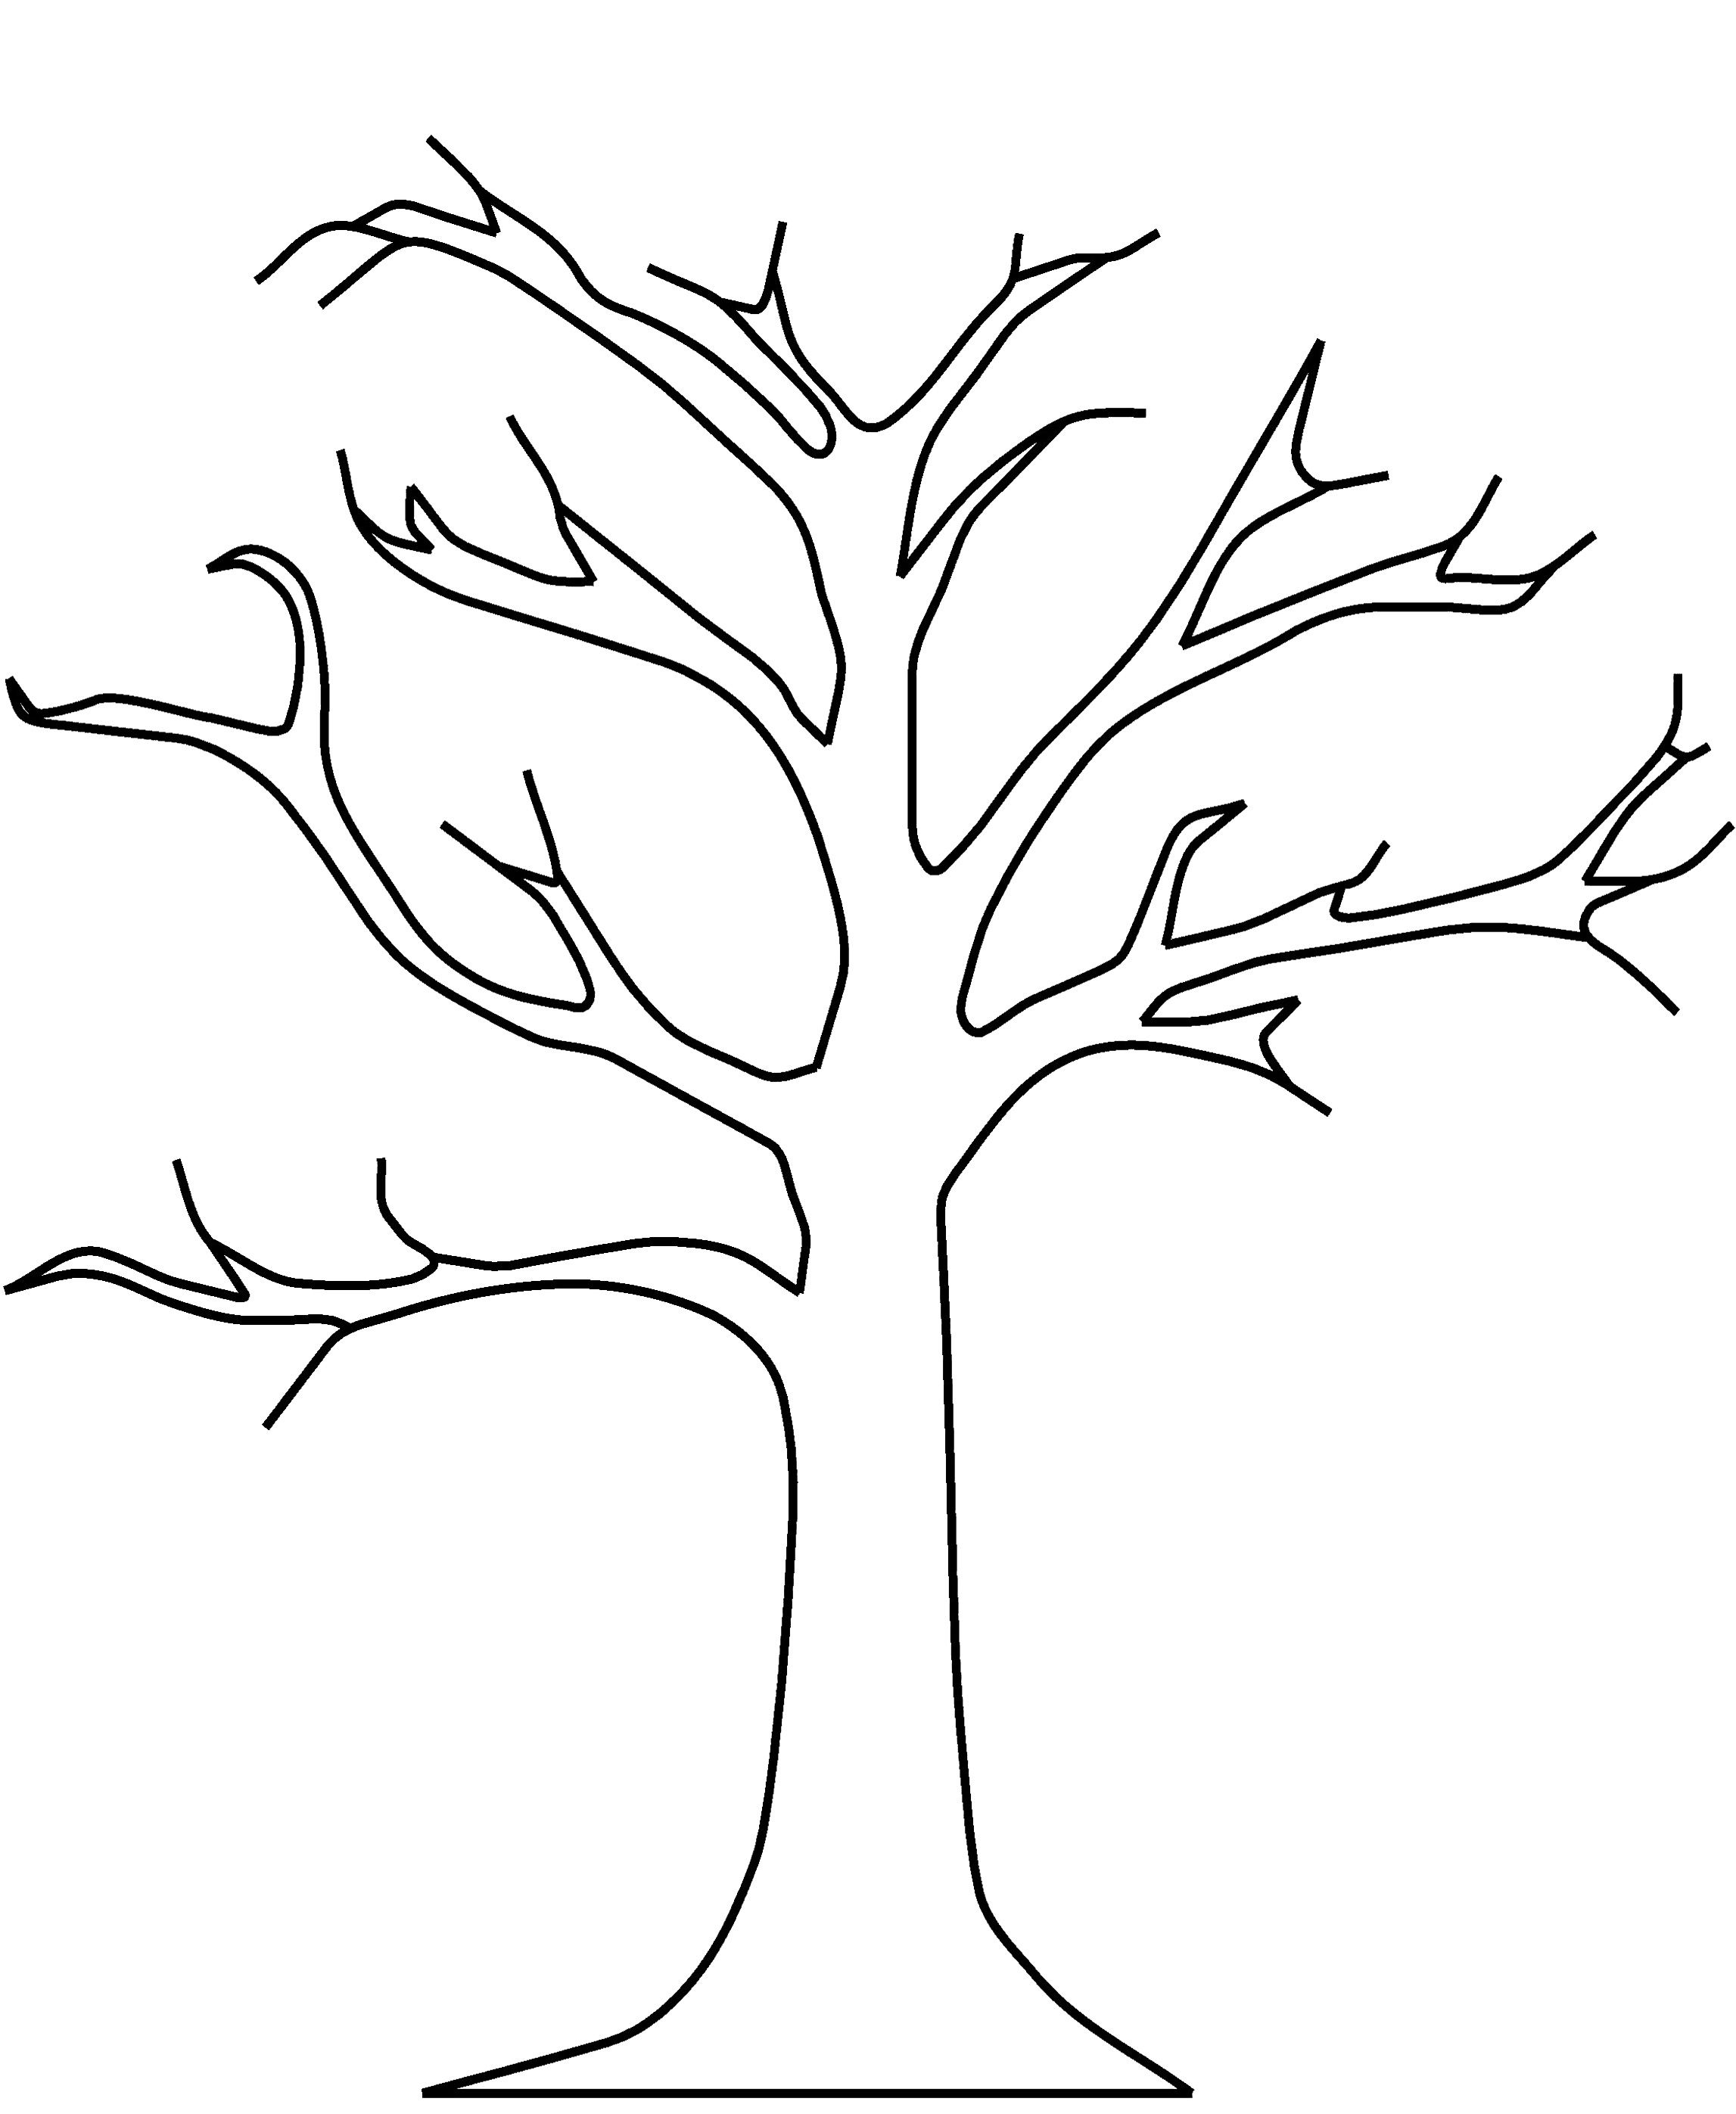 Best Photos of Tree Without Leaves Coloring Book - Trees without ...